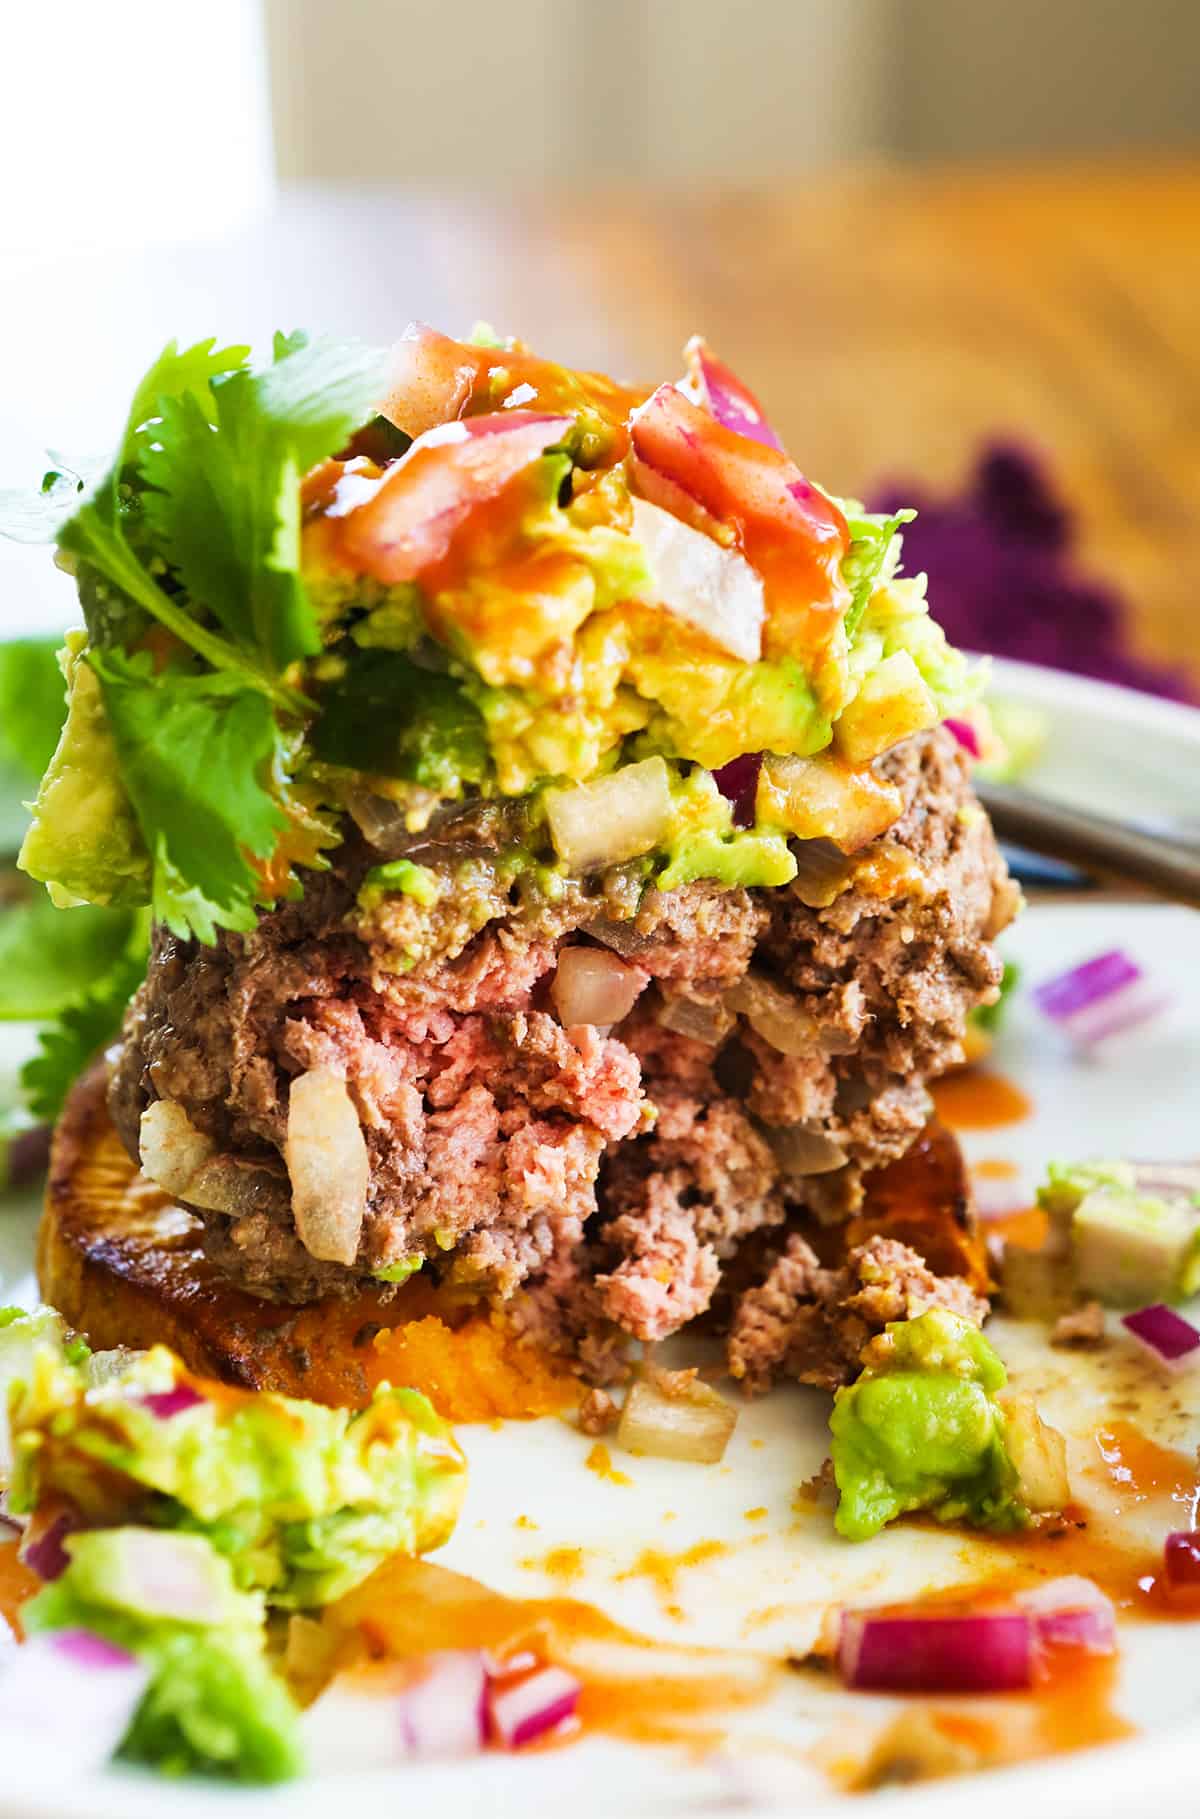 Center of a burger exposed and topped with guacamole.